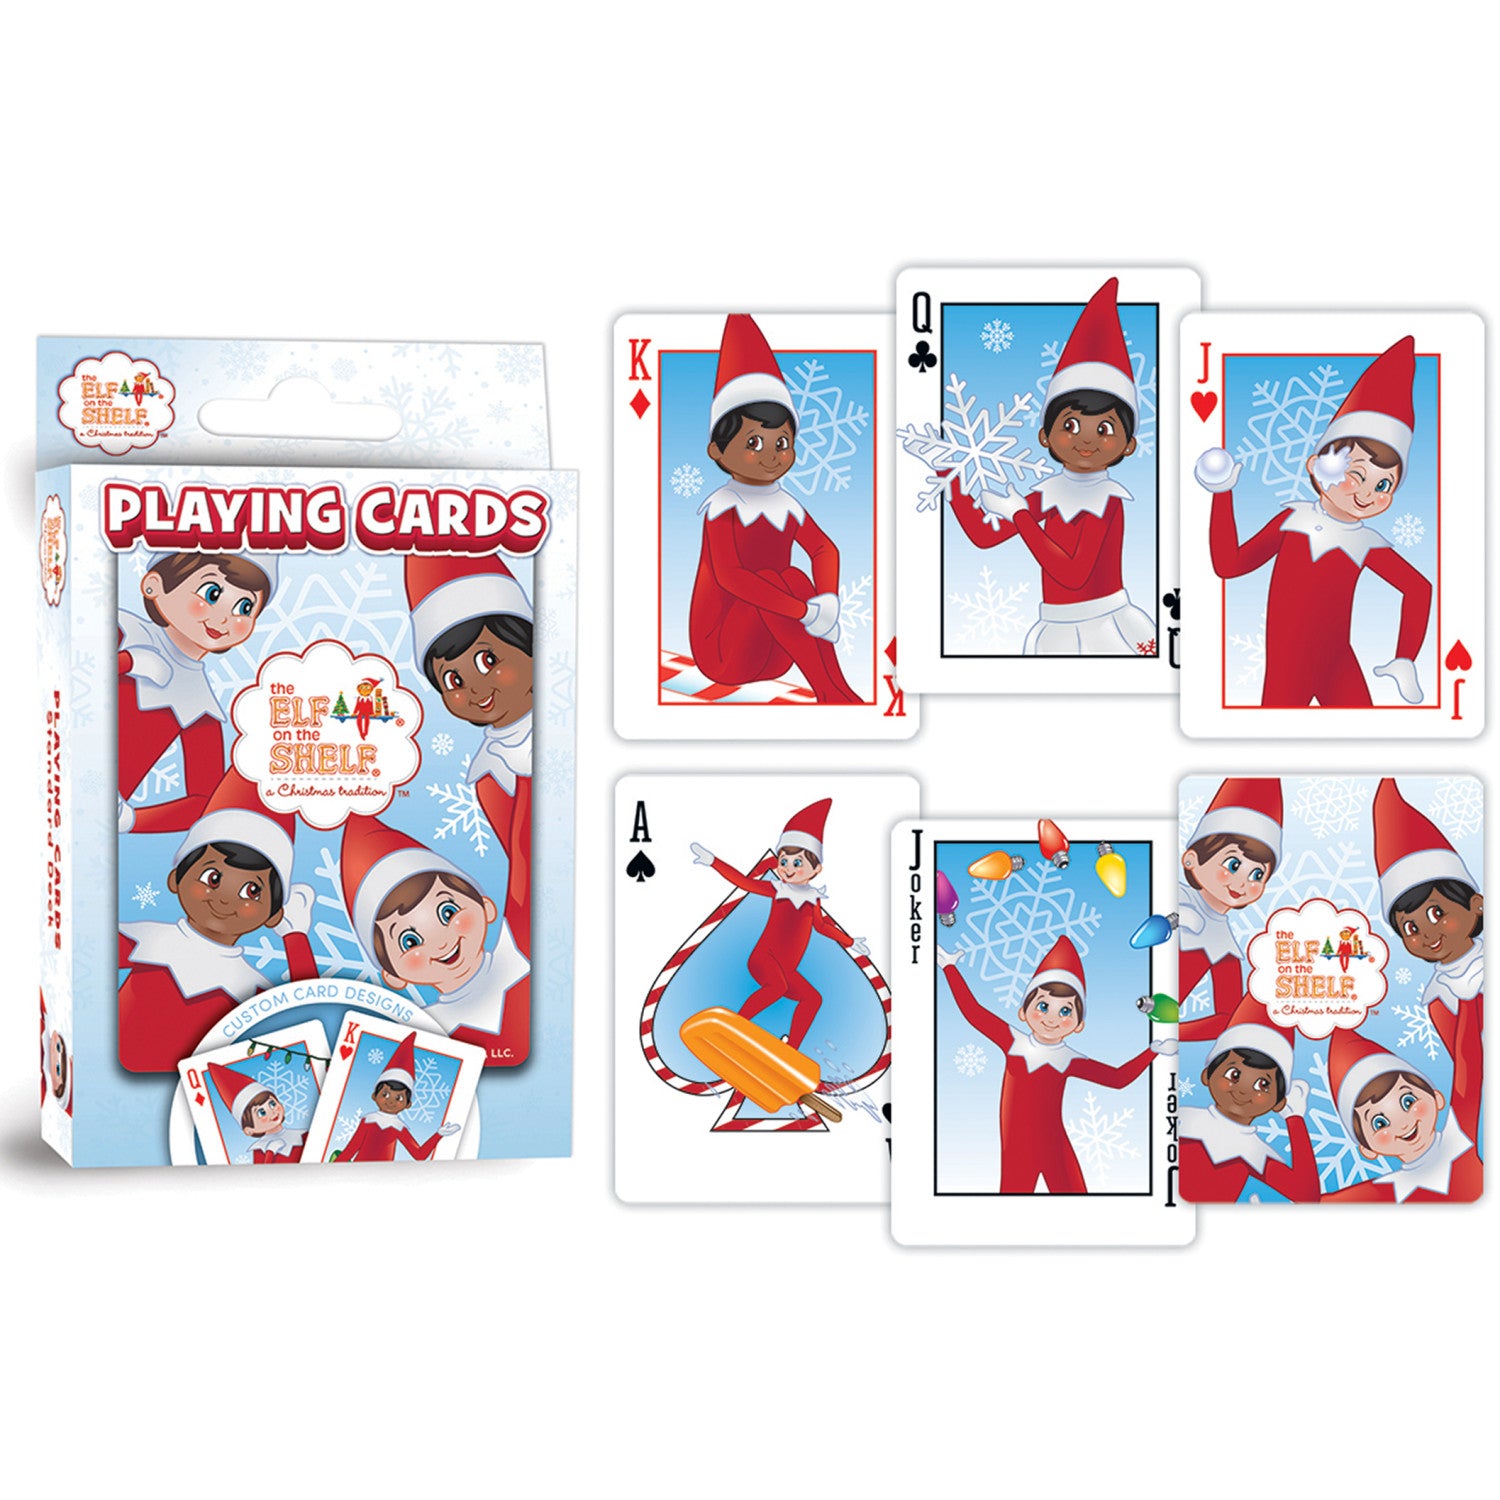 Elf on the Shelf Playing Cards - 54 Card Deck